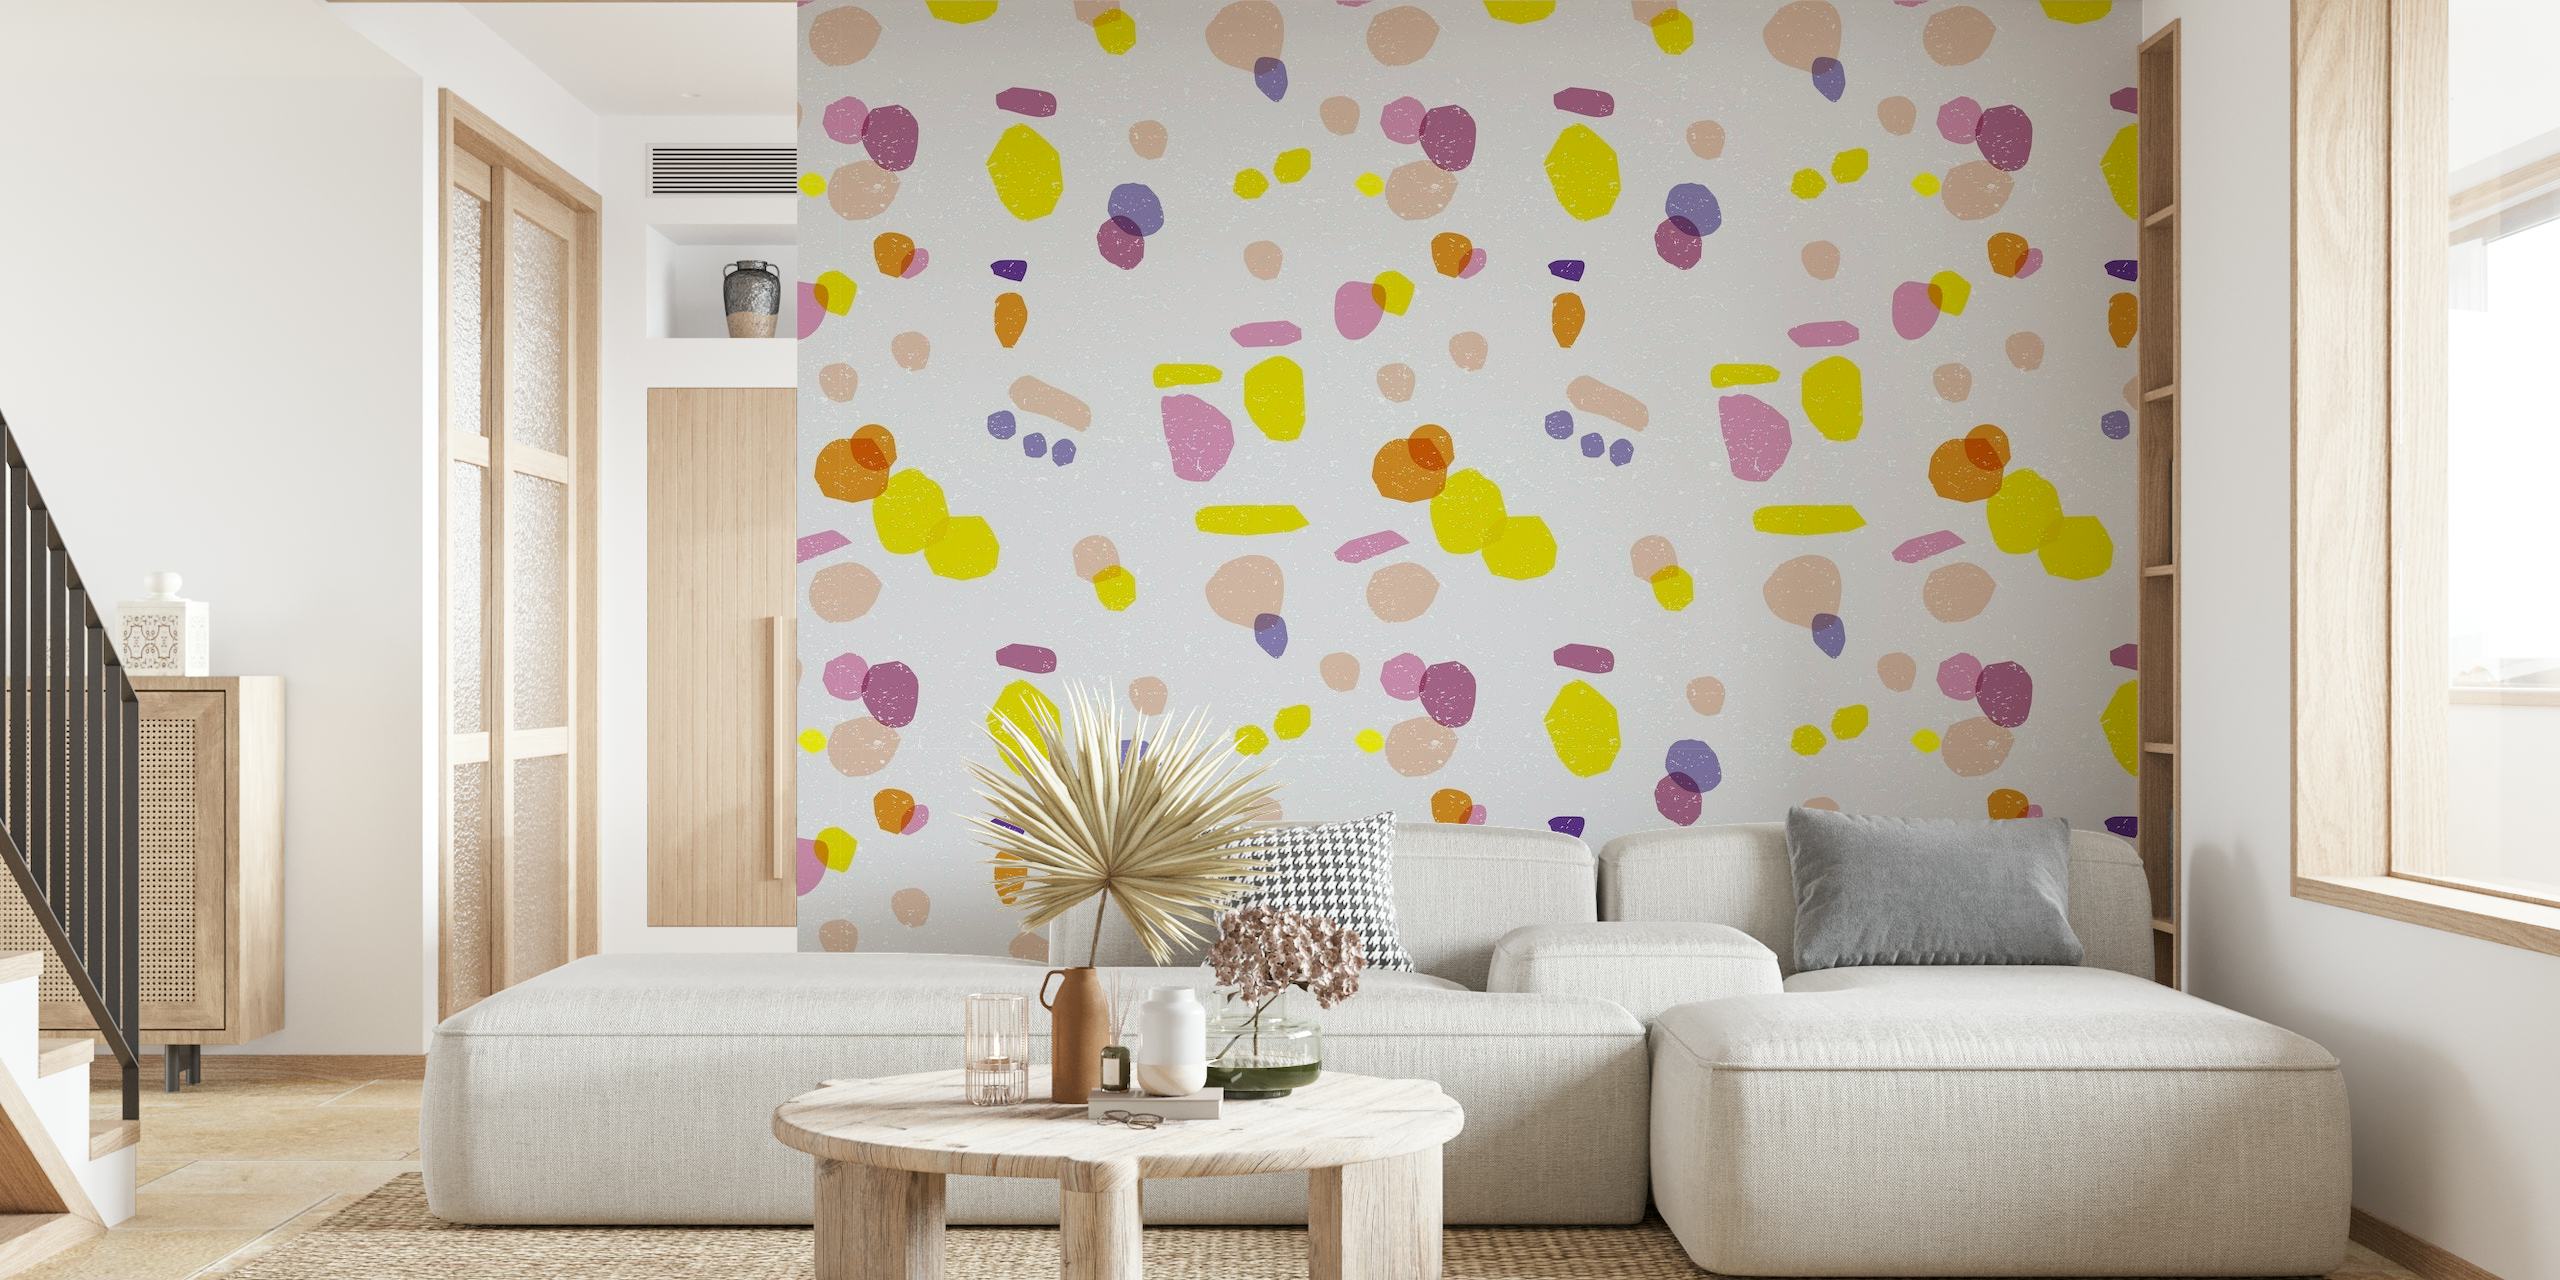 Colorful abstract stones pattern wall mural